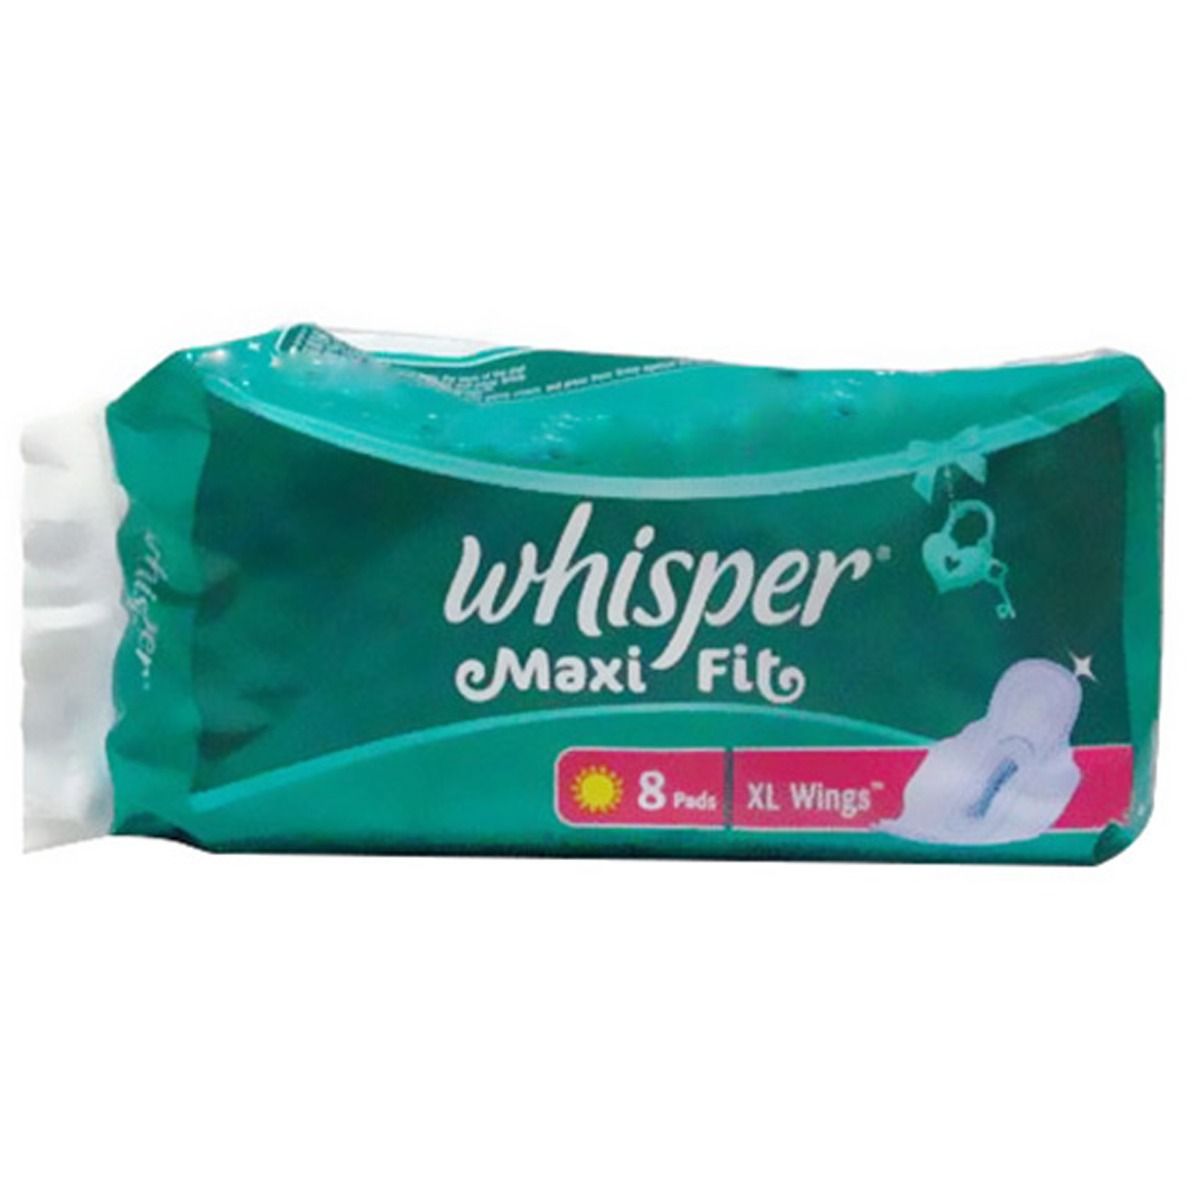 Whisper Maxi Fit Wings Sanitary Pads XL, 8 Count, Pack of 1 